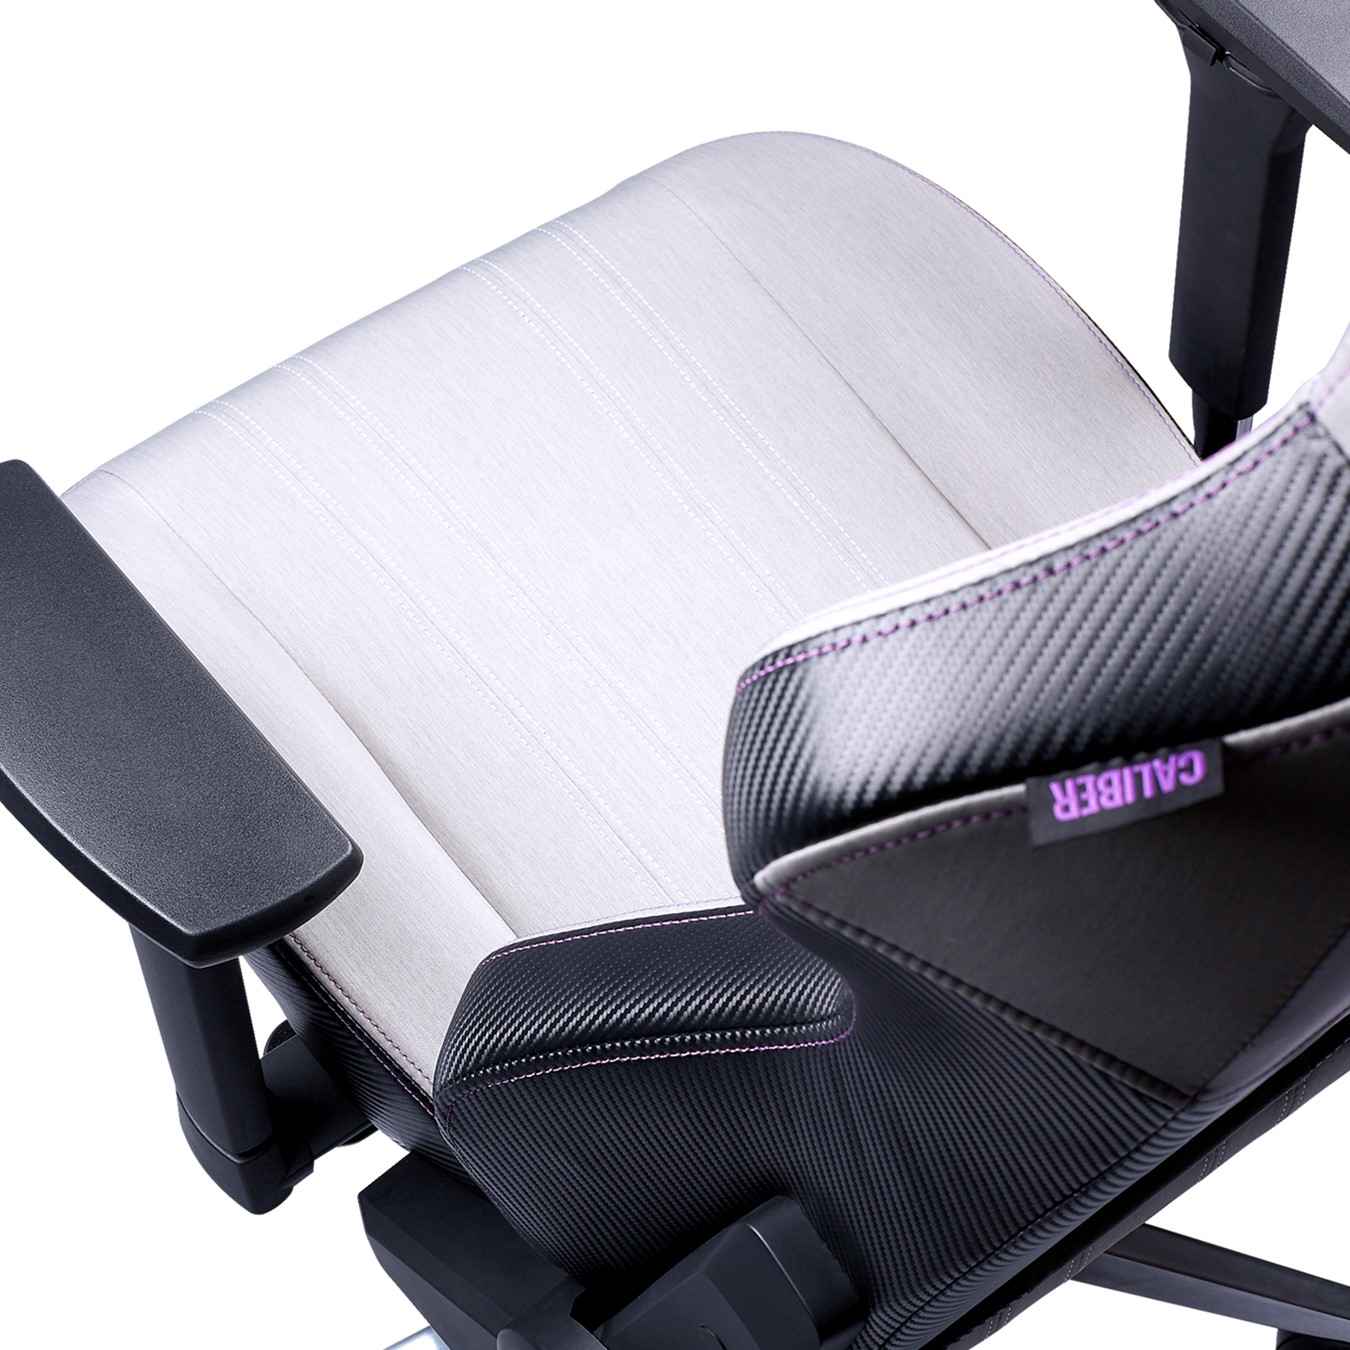 Caliber X1C Gaming Chair - The Cool-In fabric Tech also provides extra benefits of scratch resistance and a dust repellent and easy-to-clean surface for daily usages.